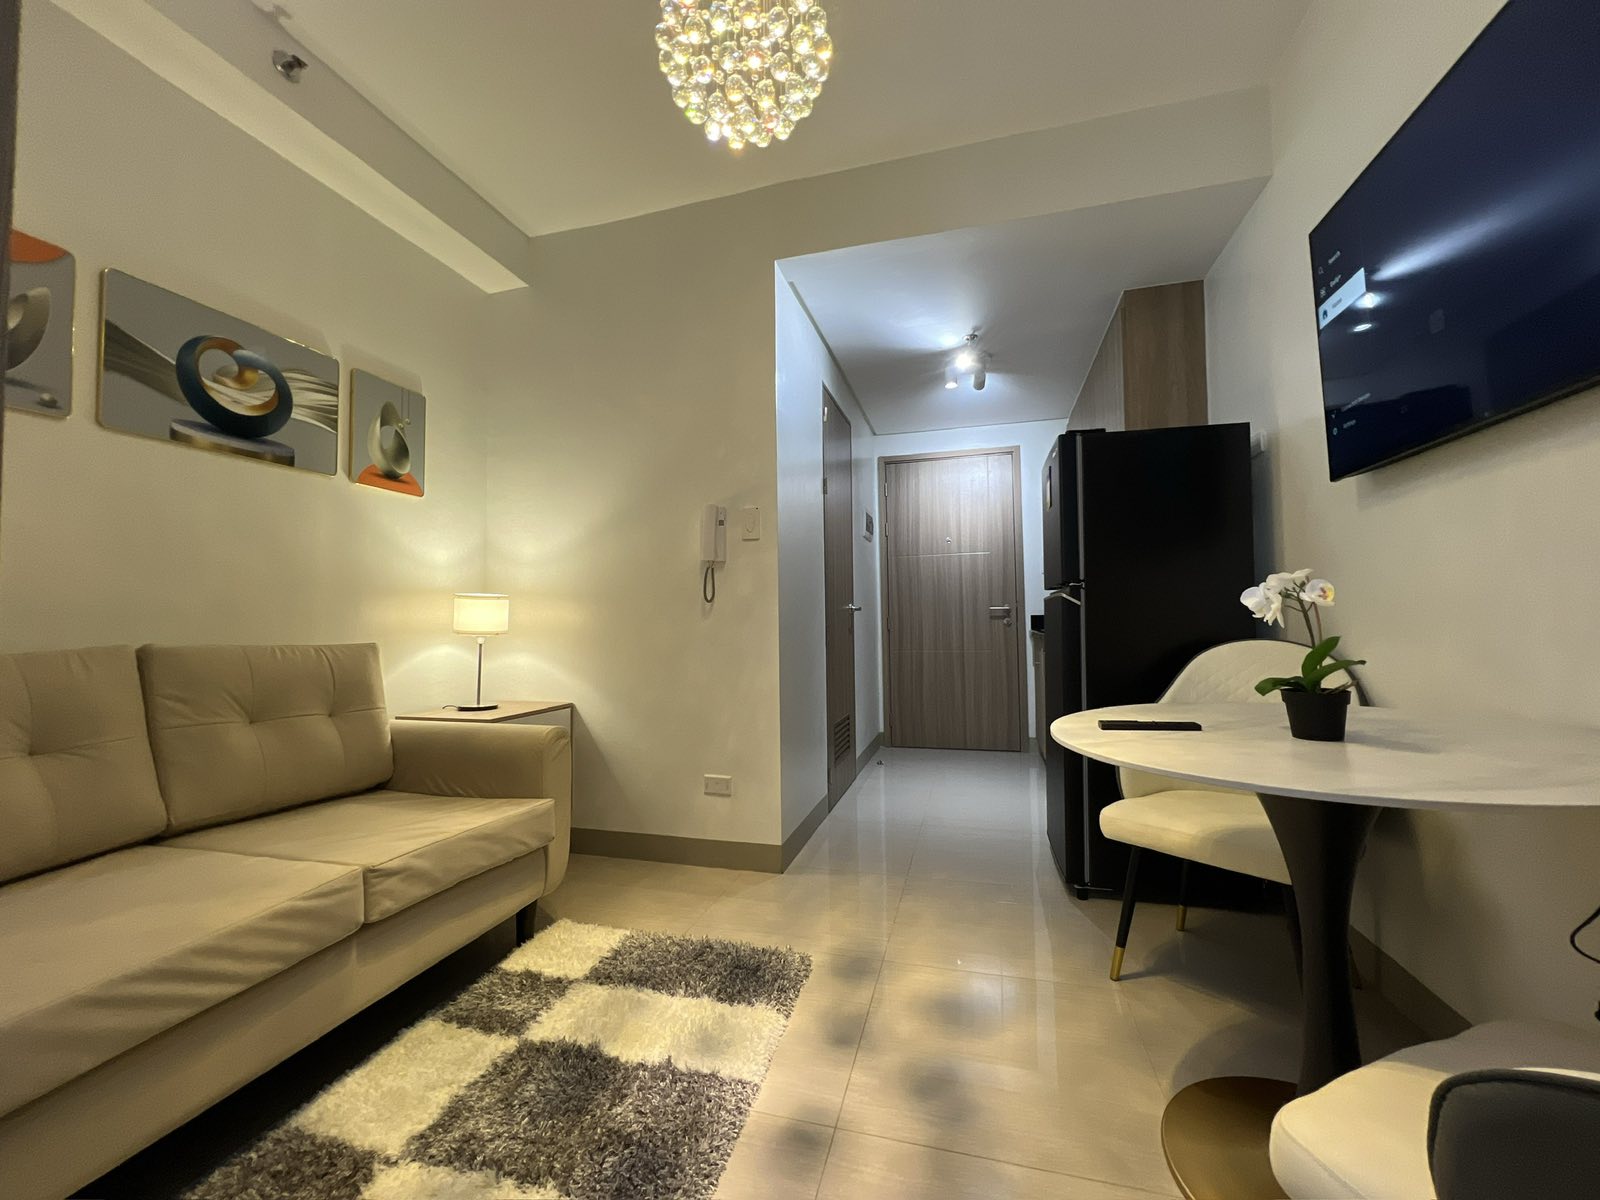 FOR RENT 1BR BARE UNIT AT SHORE 2 RESIDENCES PASAY